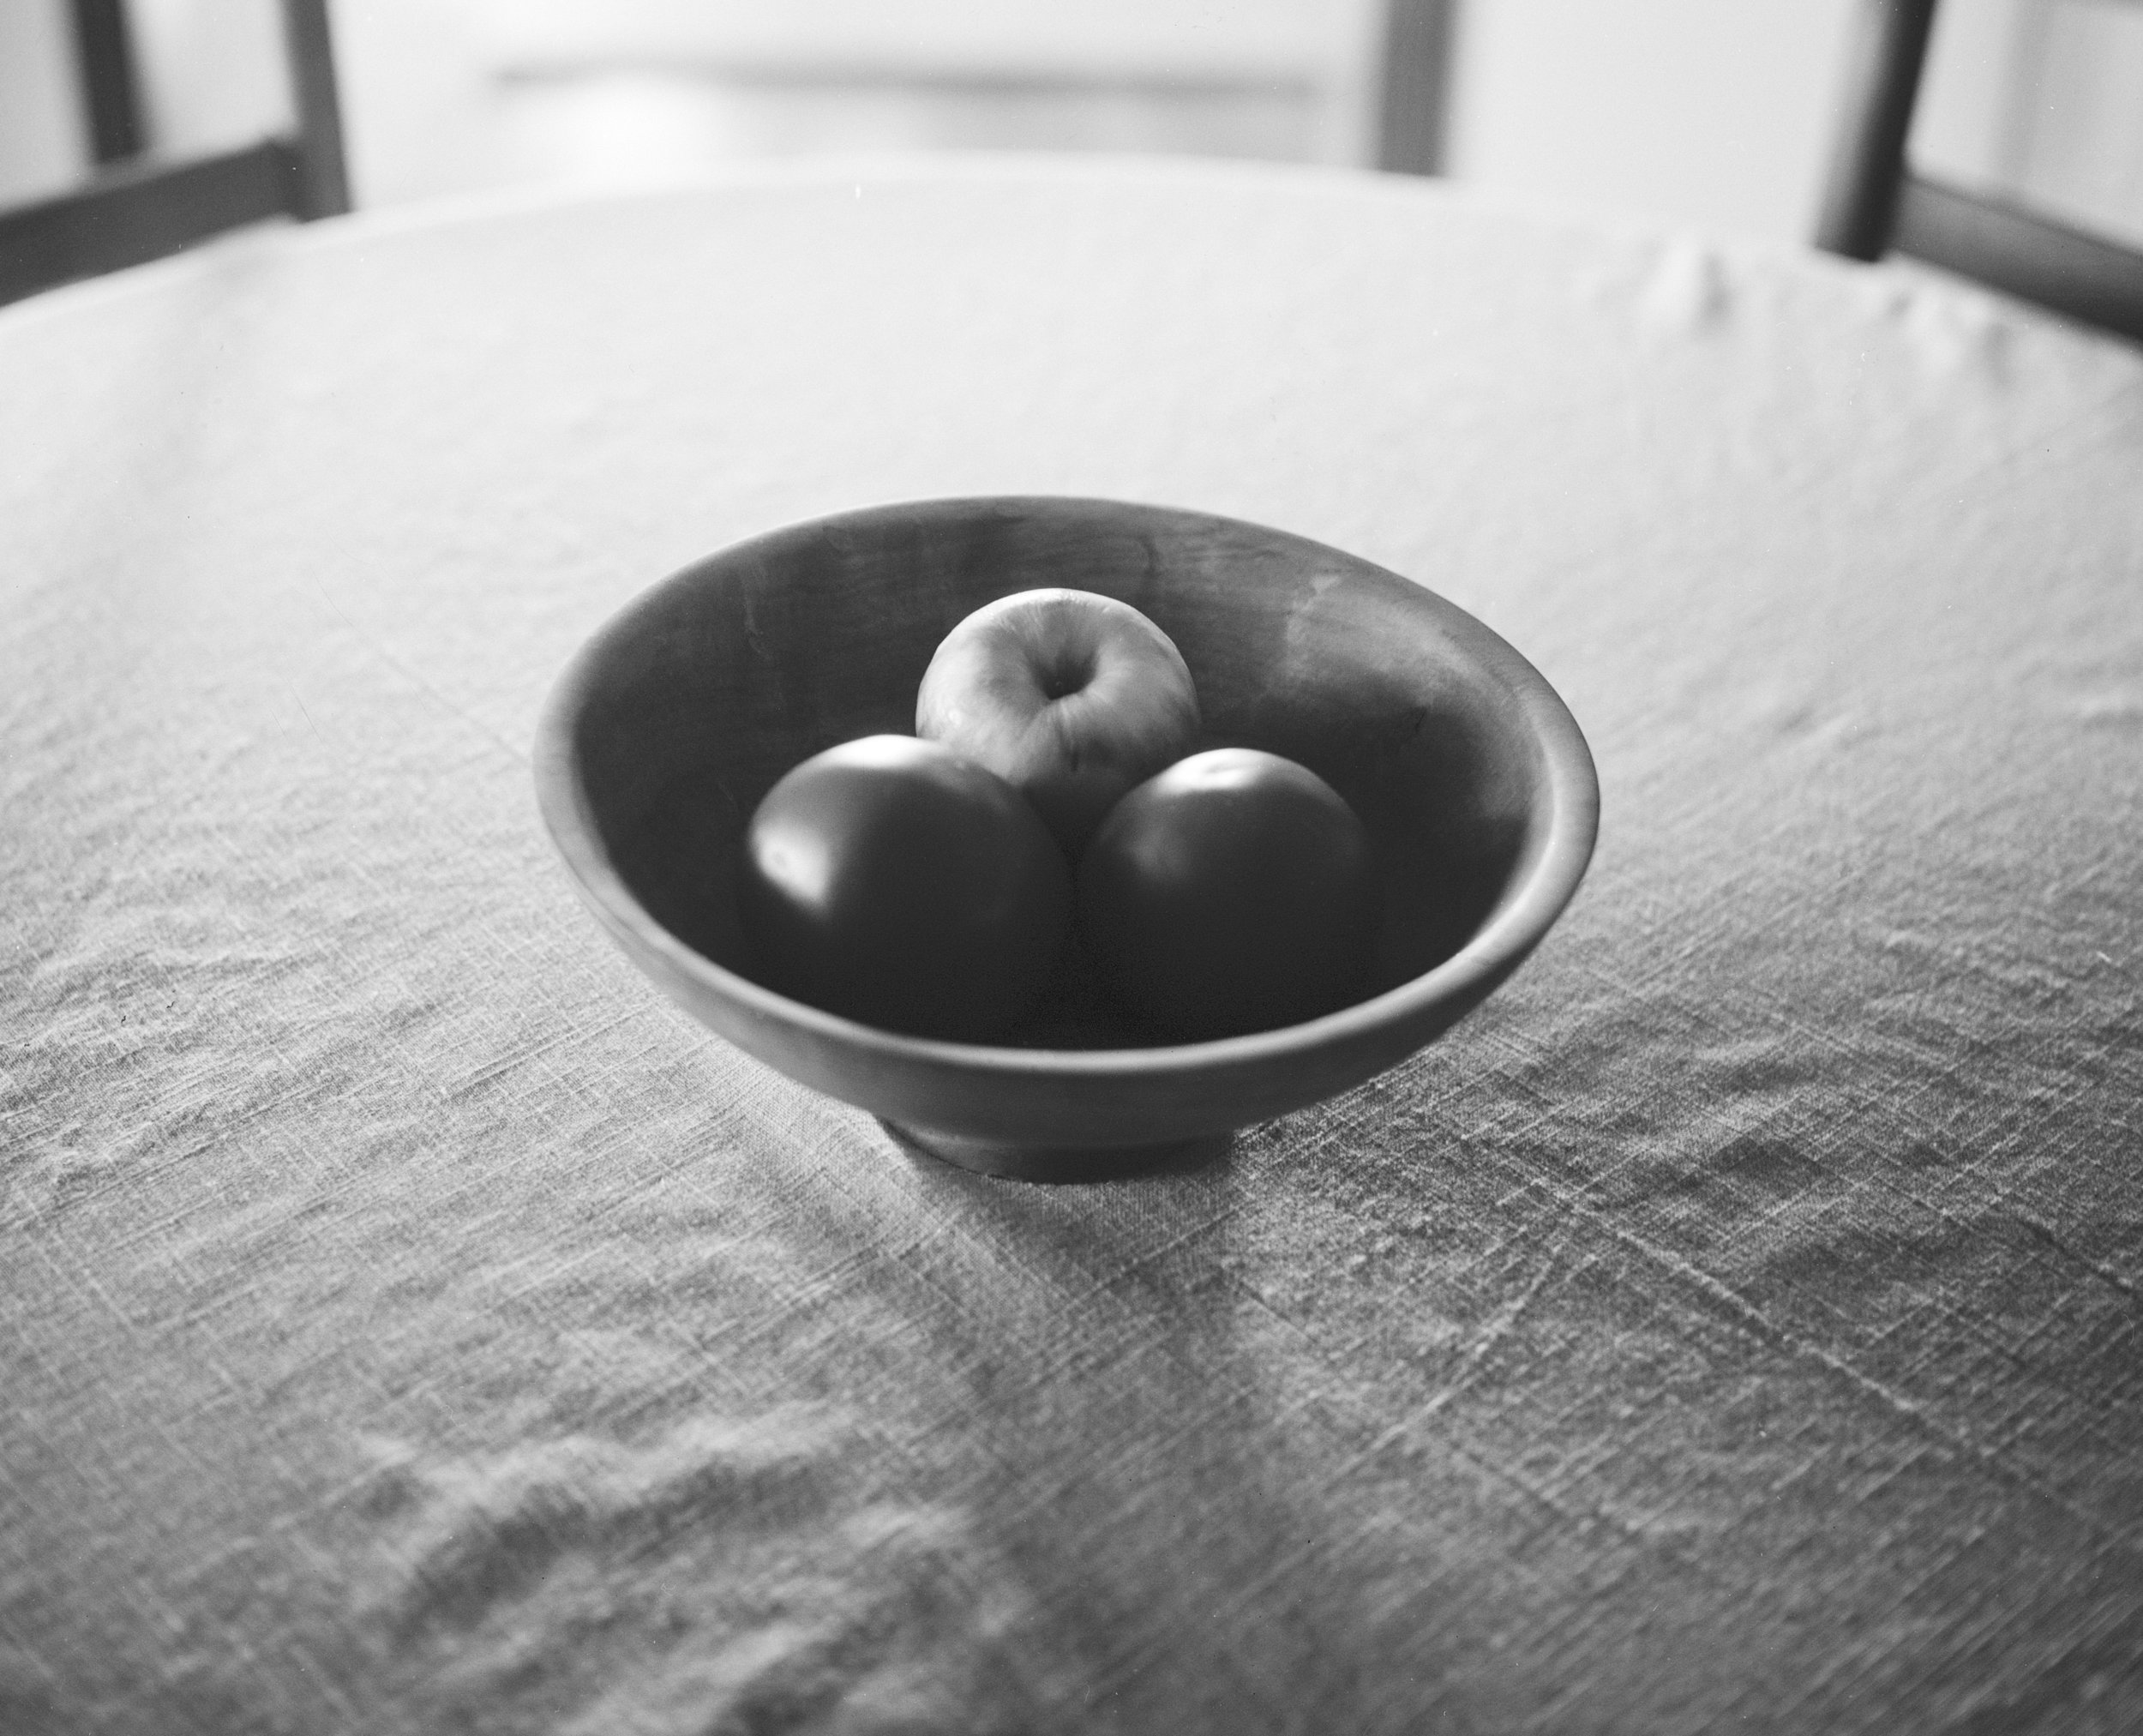  Apple and tomatoes in a wooden bowl - captured using a Calumet 4x5 view camera with a Kodak Ektar 127mm f/4.7 lens on Fomapan 100 4x5 sheet film, developed in SP-76EC. &nbsp;I guessed at the exposure (I need a light meter) and shot this at f/4.7 for